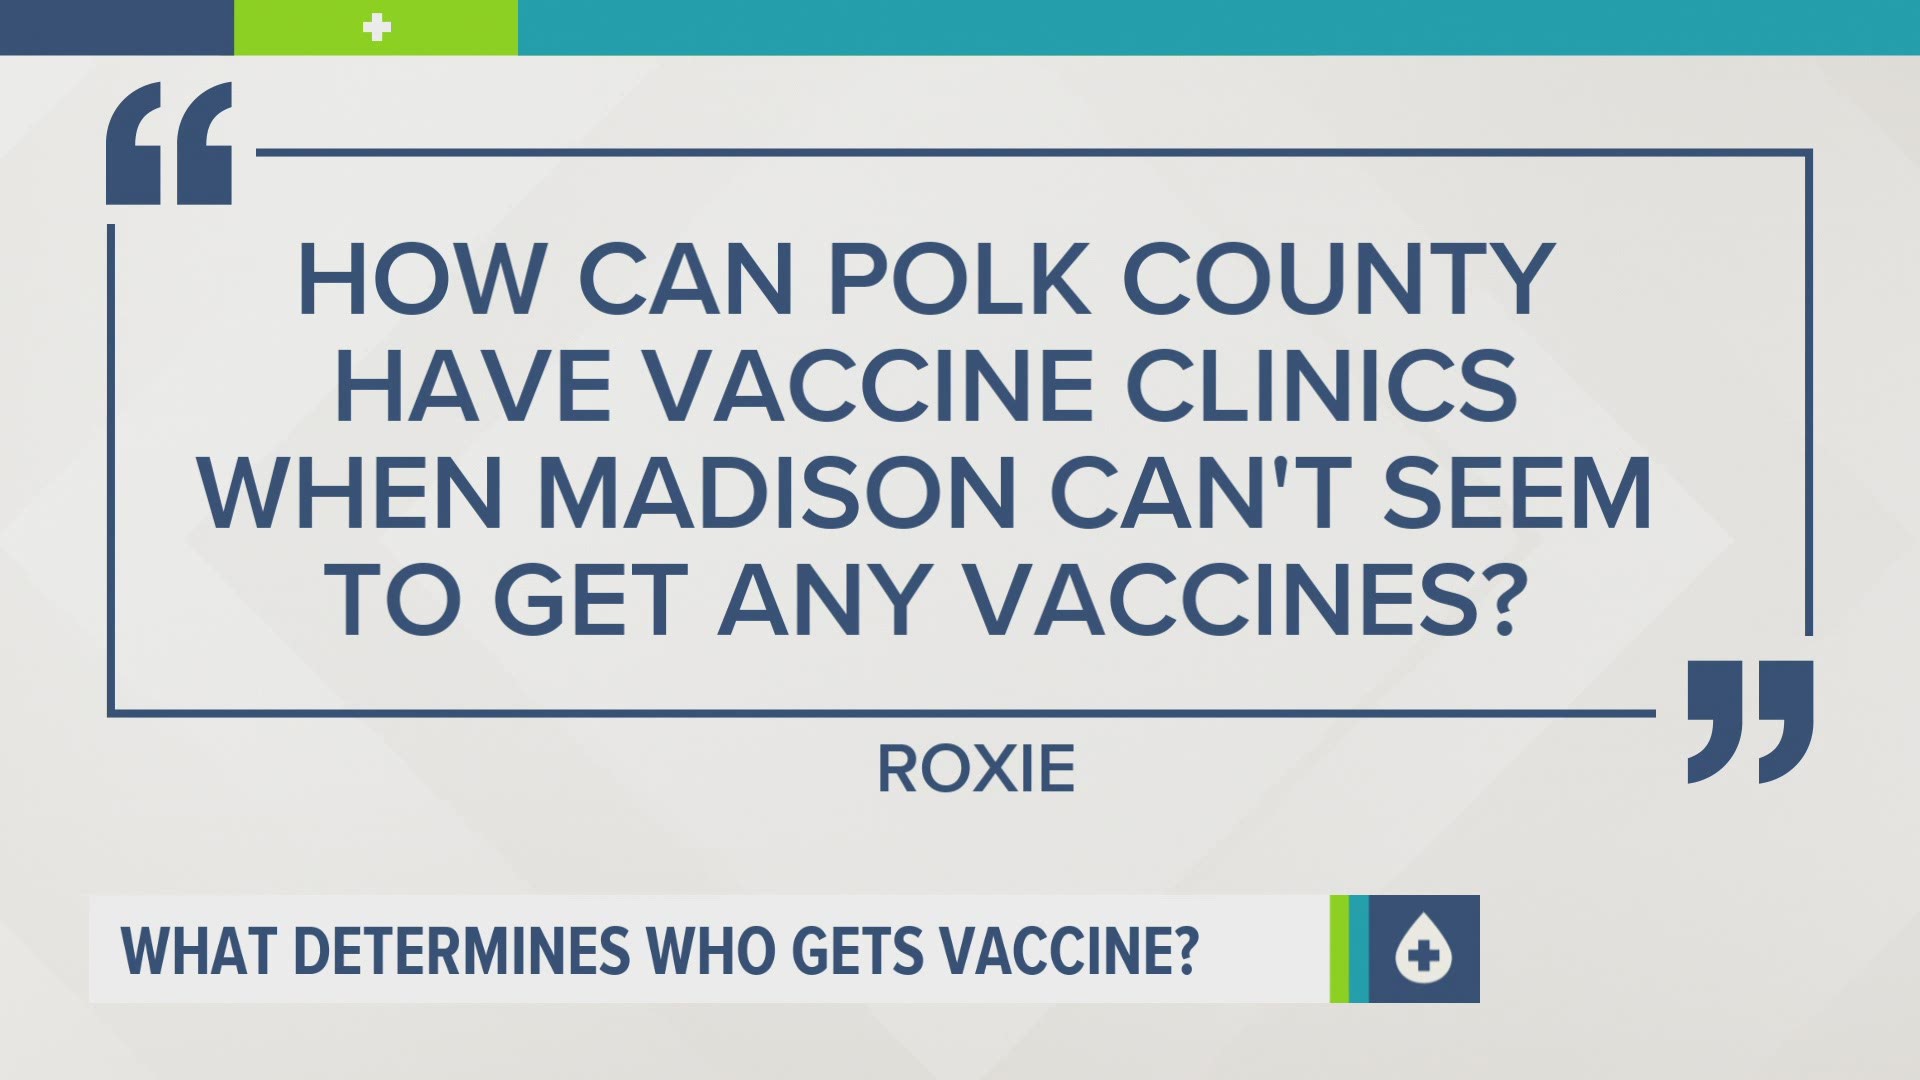 Since Polk County has the largest population in Iowa, more doses are allocated to it than other counties.